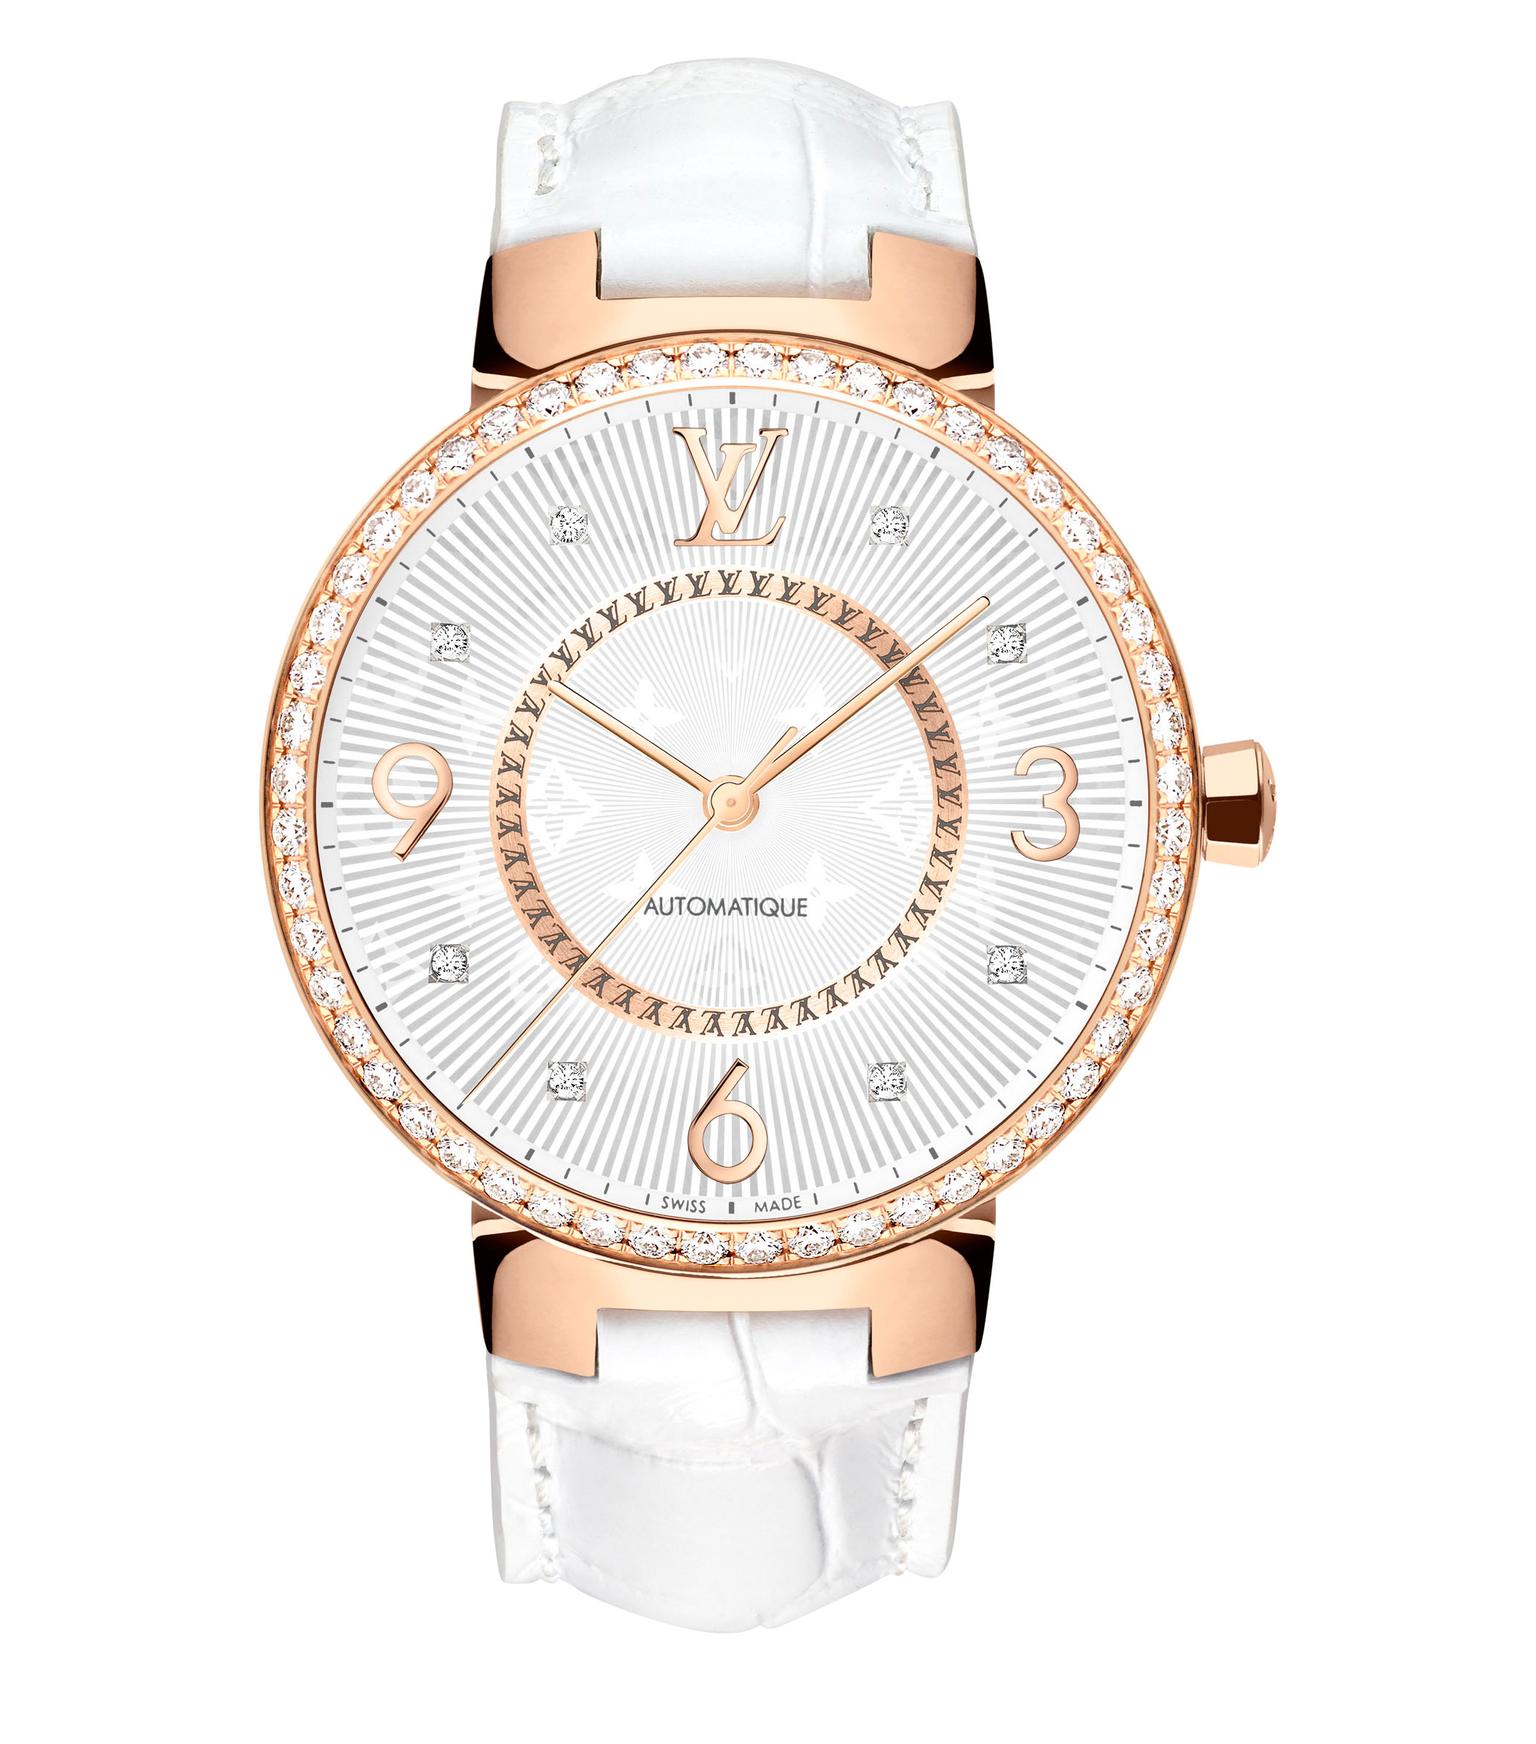 Tambour Monogram 35mm watch in pink gold with diamonds, Louis Vuitton